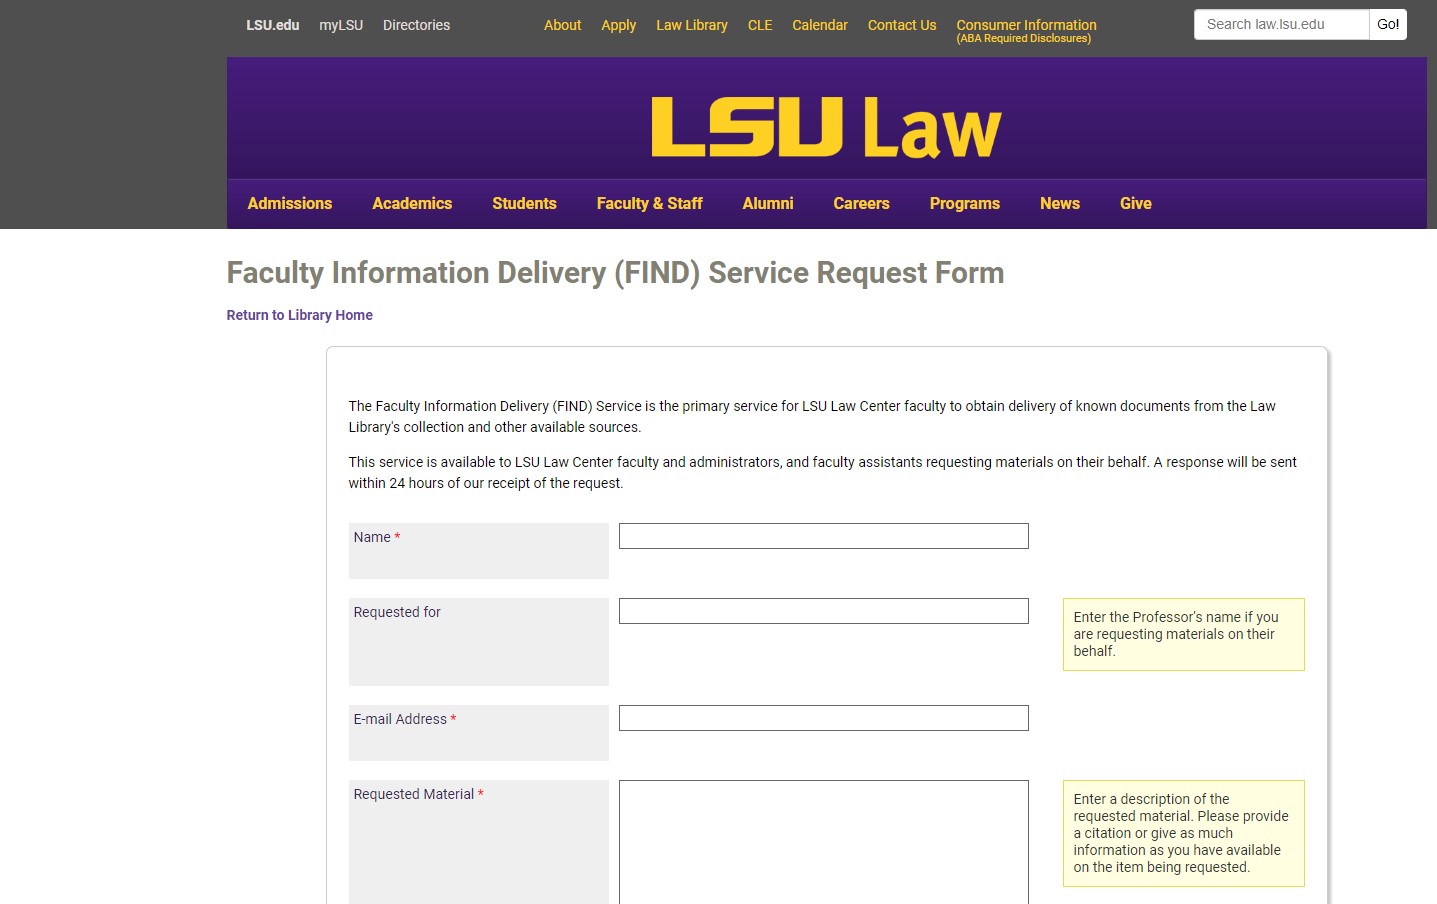 FIND service request form screen